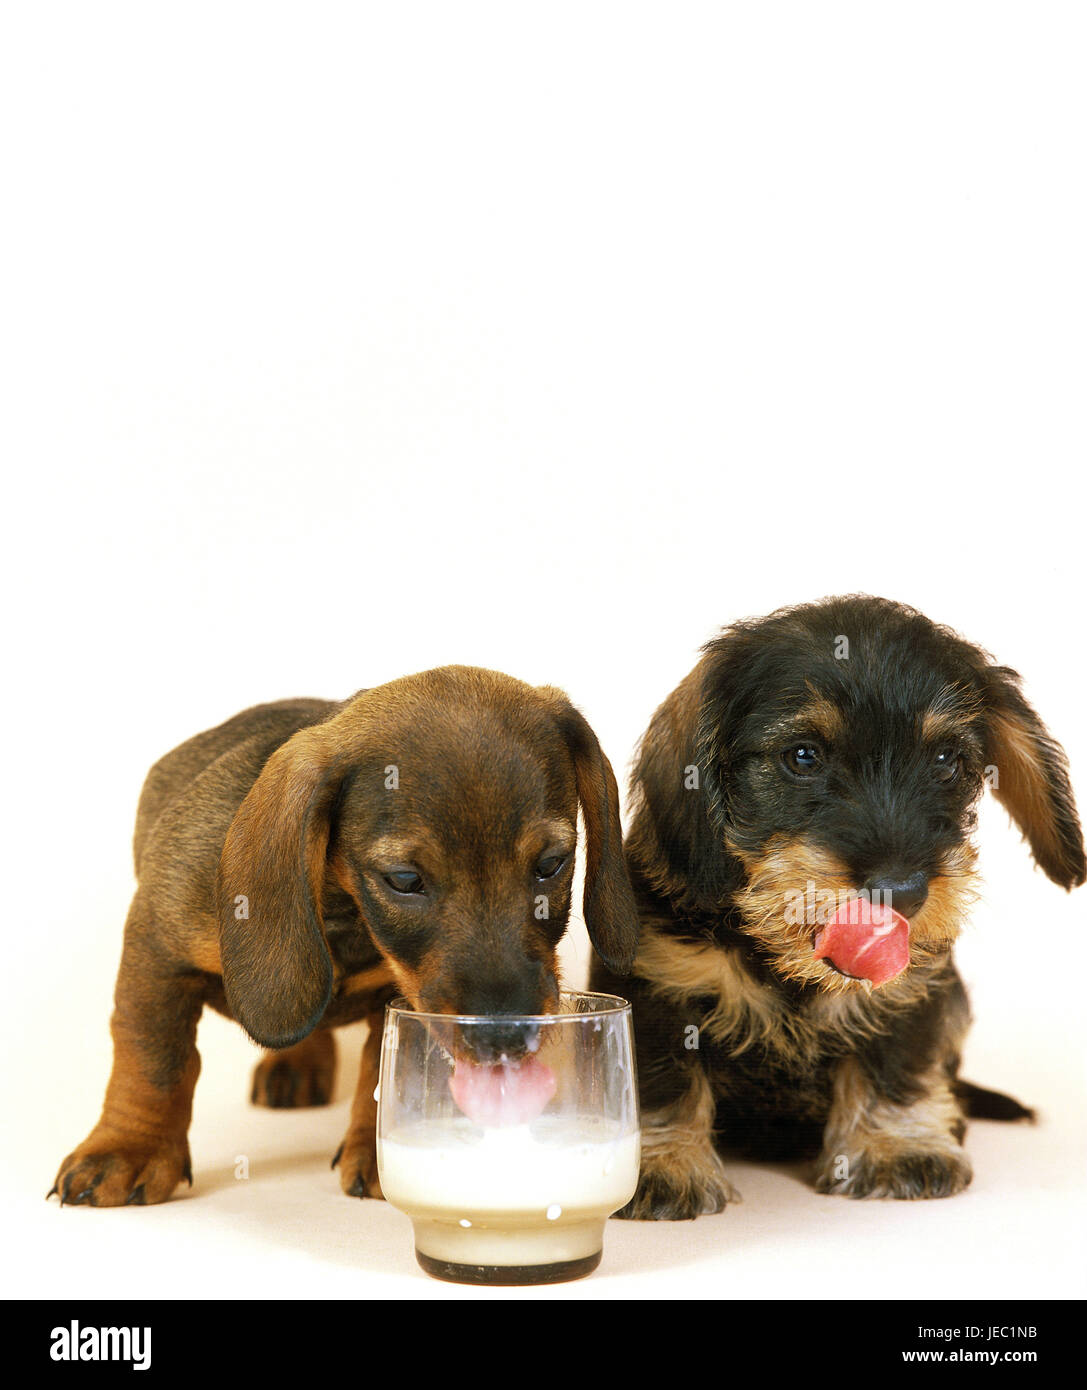 Two dachshunds, one drinks milk, Stock Photo